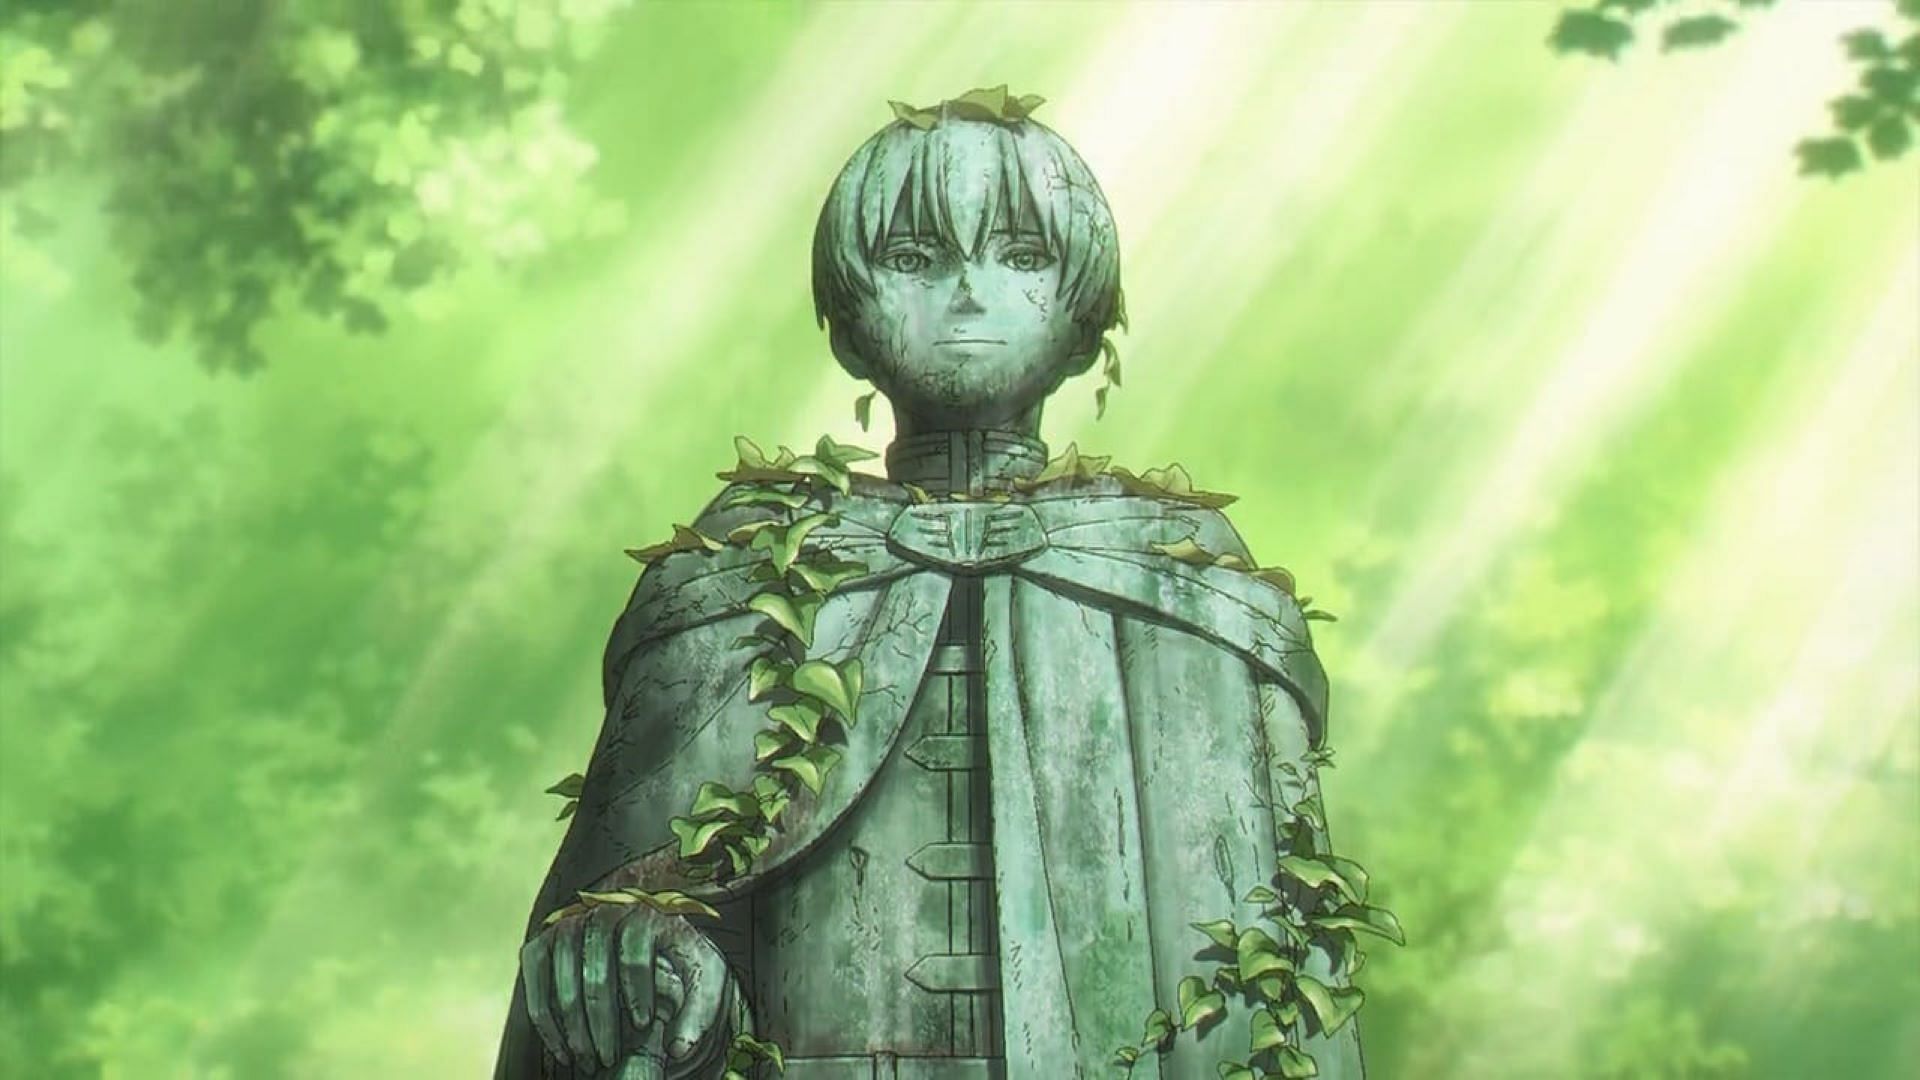 Himmel&#039;s statue in the anime (Image via Madhouse)